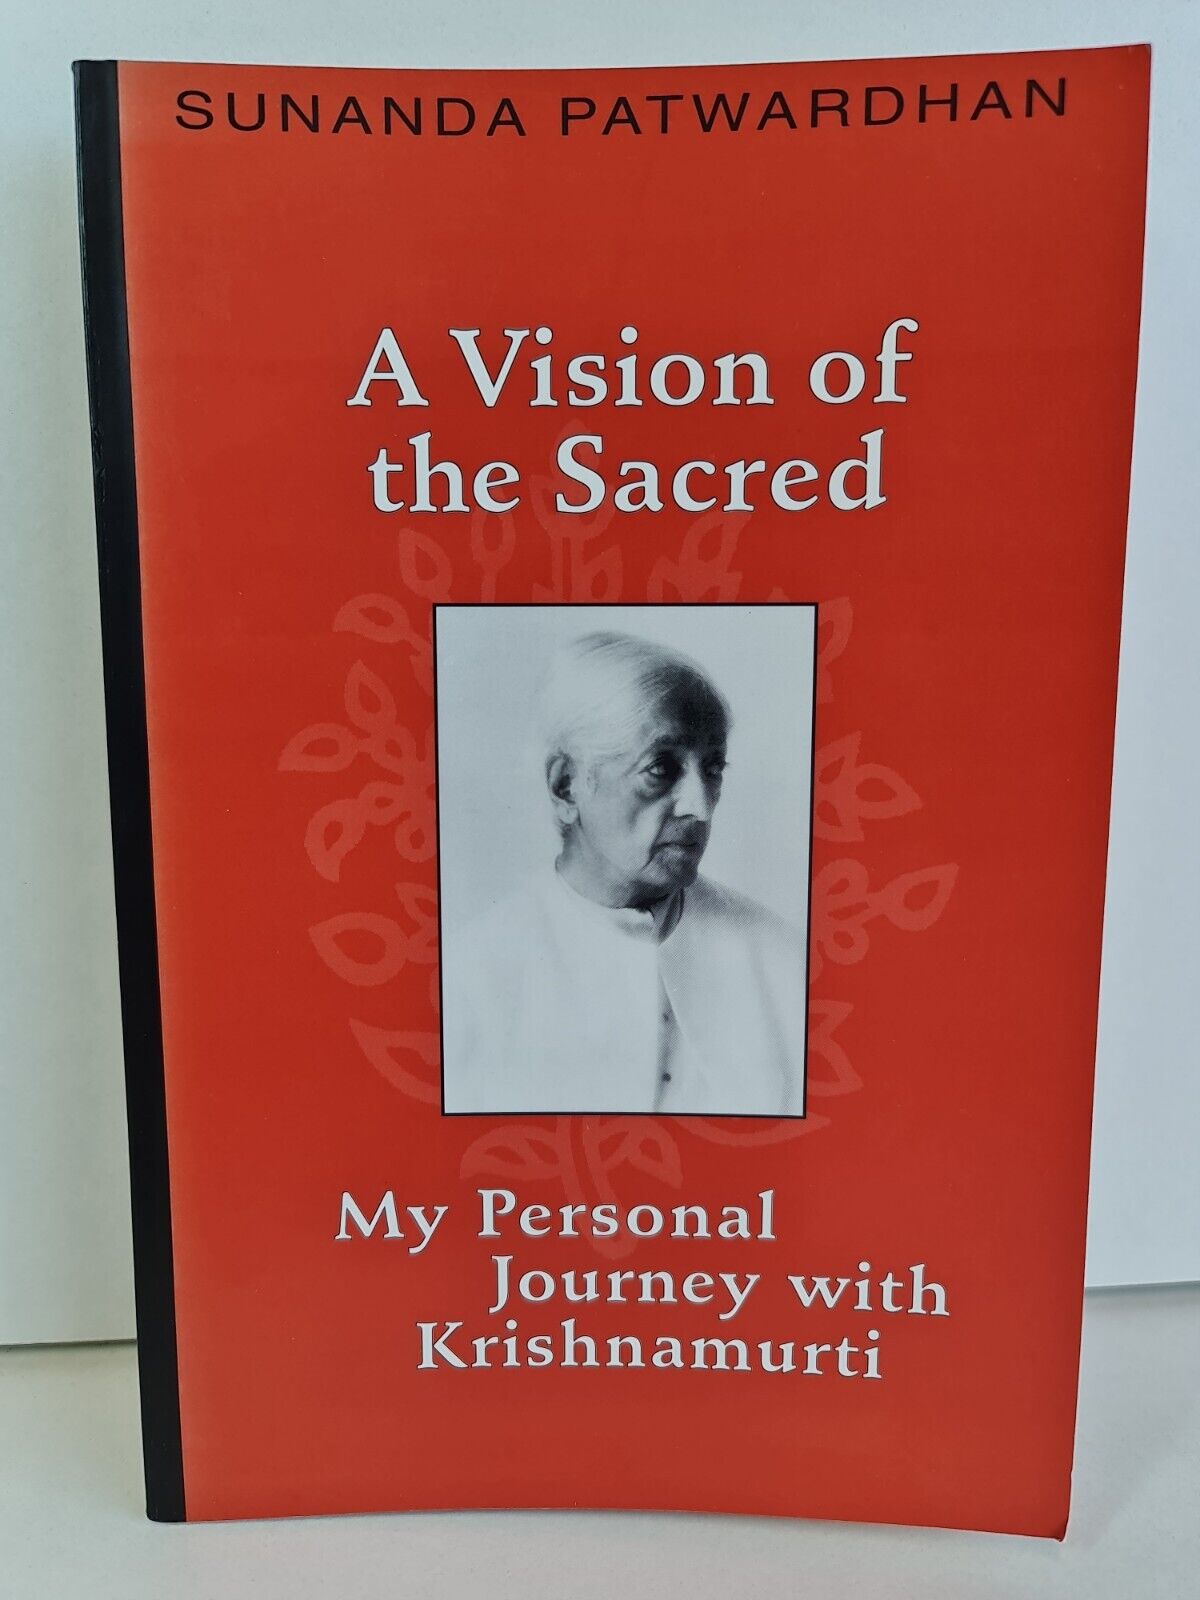 A Vision of the Sacred: My Personal Journey With Krishnamurti by Sunanda Patwardhan (2000)